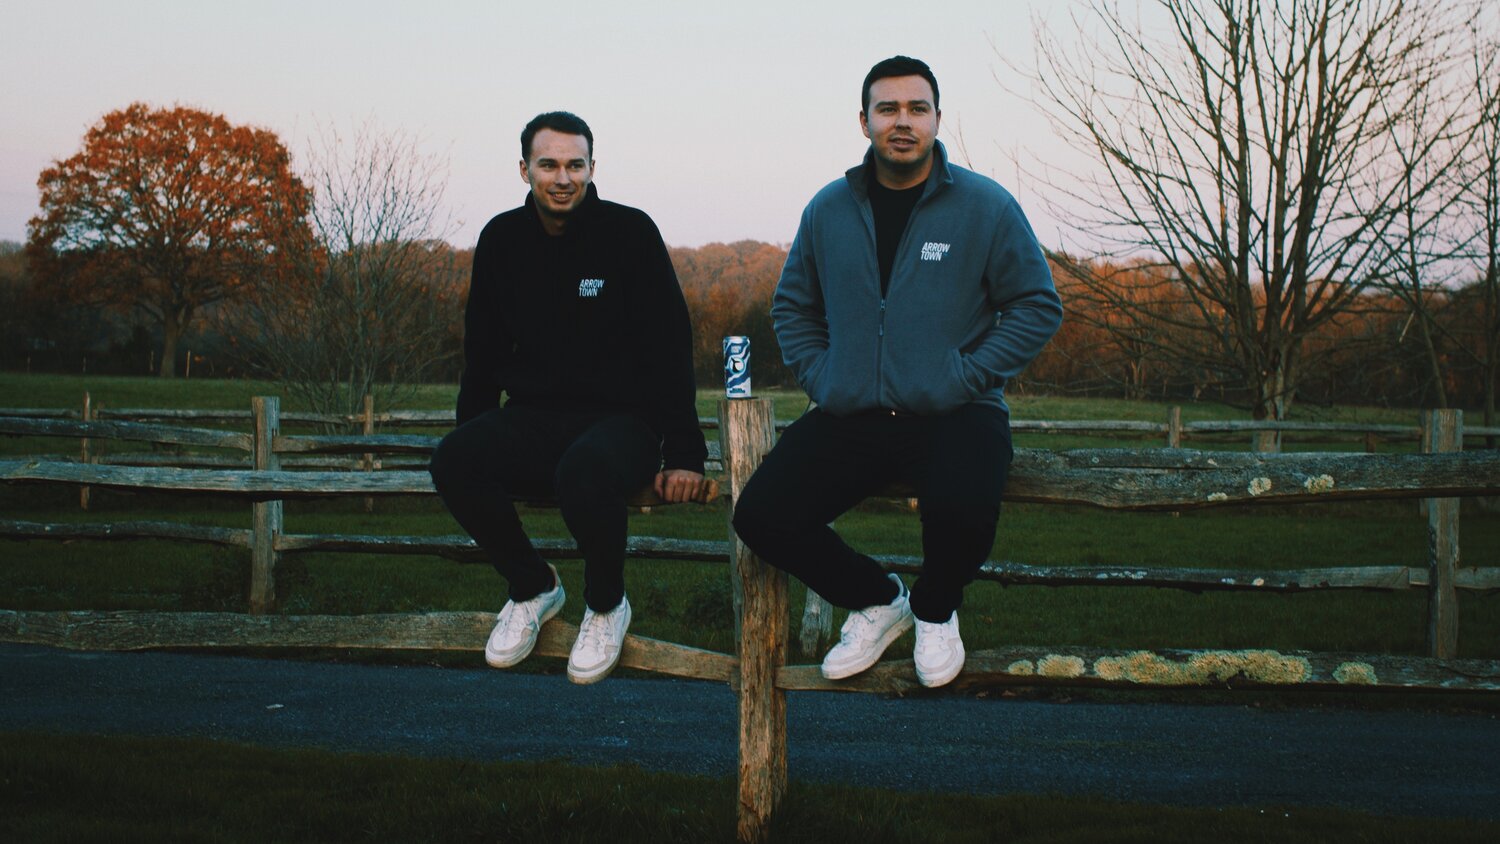 The two brother founders of Arrowtown hard seltzer, Rob and James Smith, sit in the Sussex countryside